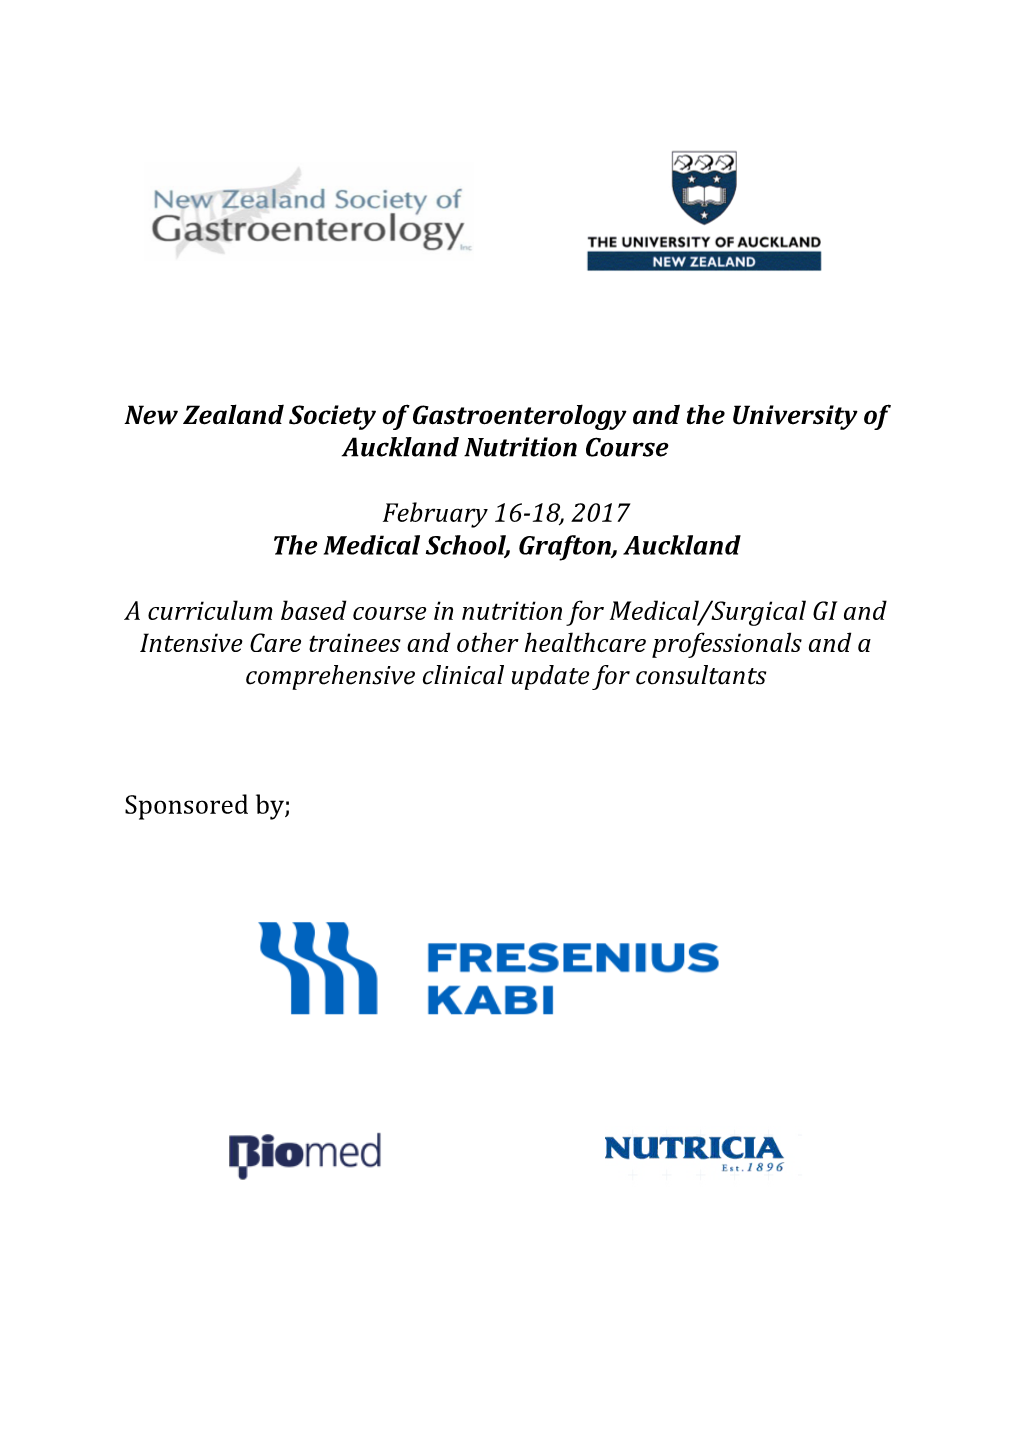 New Zealand Society of Gastroenterology and the University of Auckland Nutrition Course